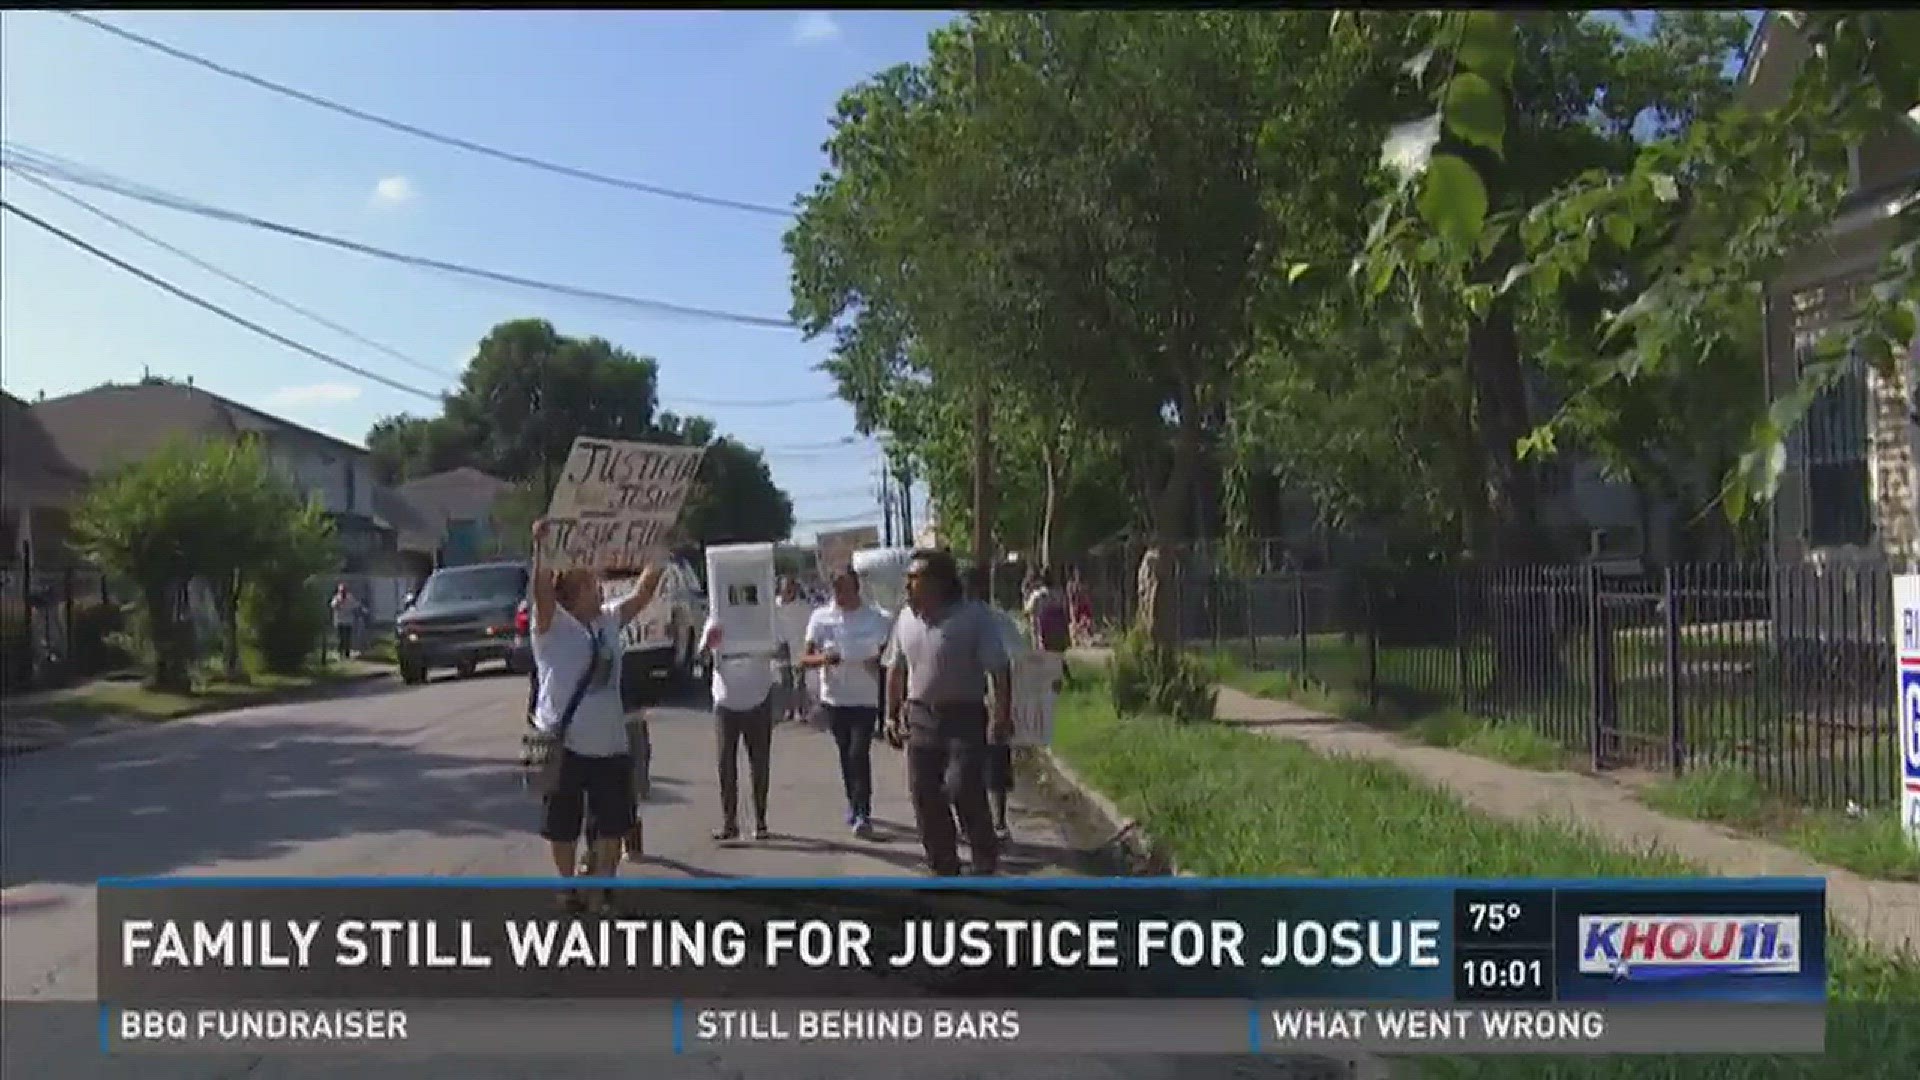 The family of 11-year-old Josue Flores, who was brutally stabbed walking home from school Tuesday, is waiting for justice three days after he was killed.